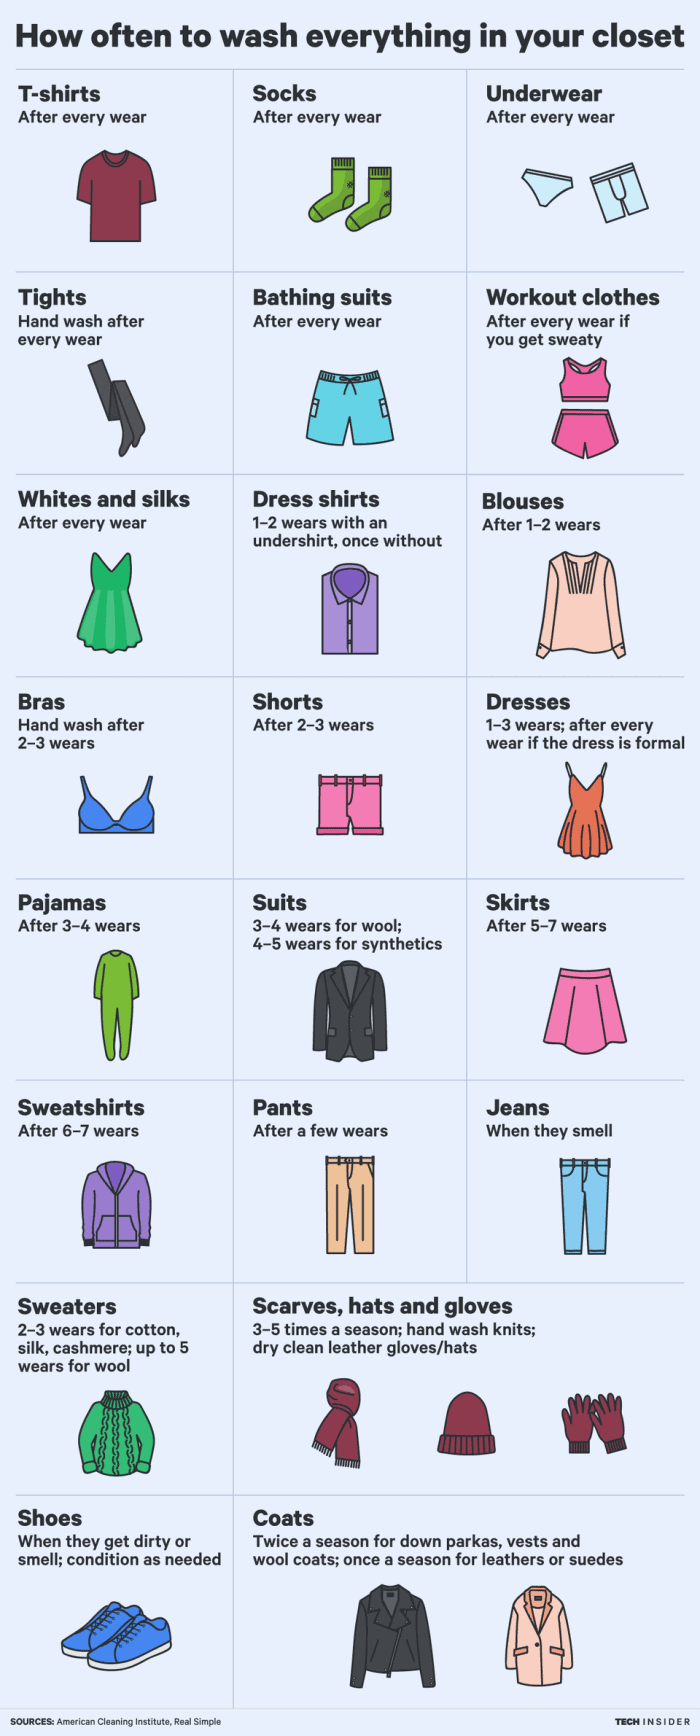 How Often to Wash Clothes